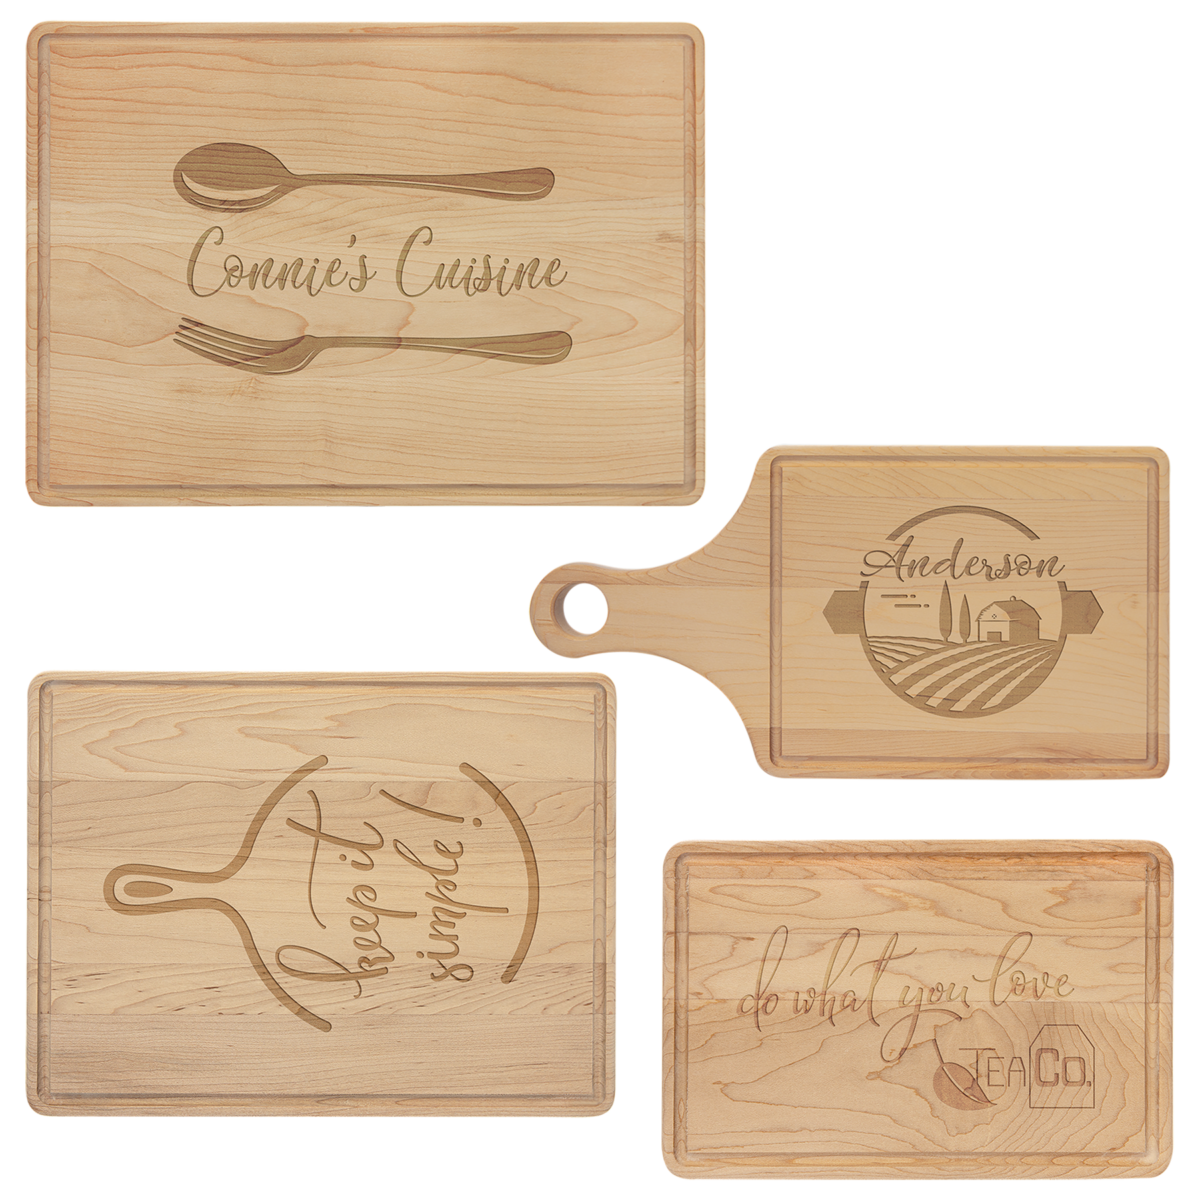 Recipe Engraved on Cutting Board